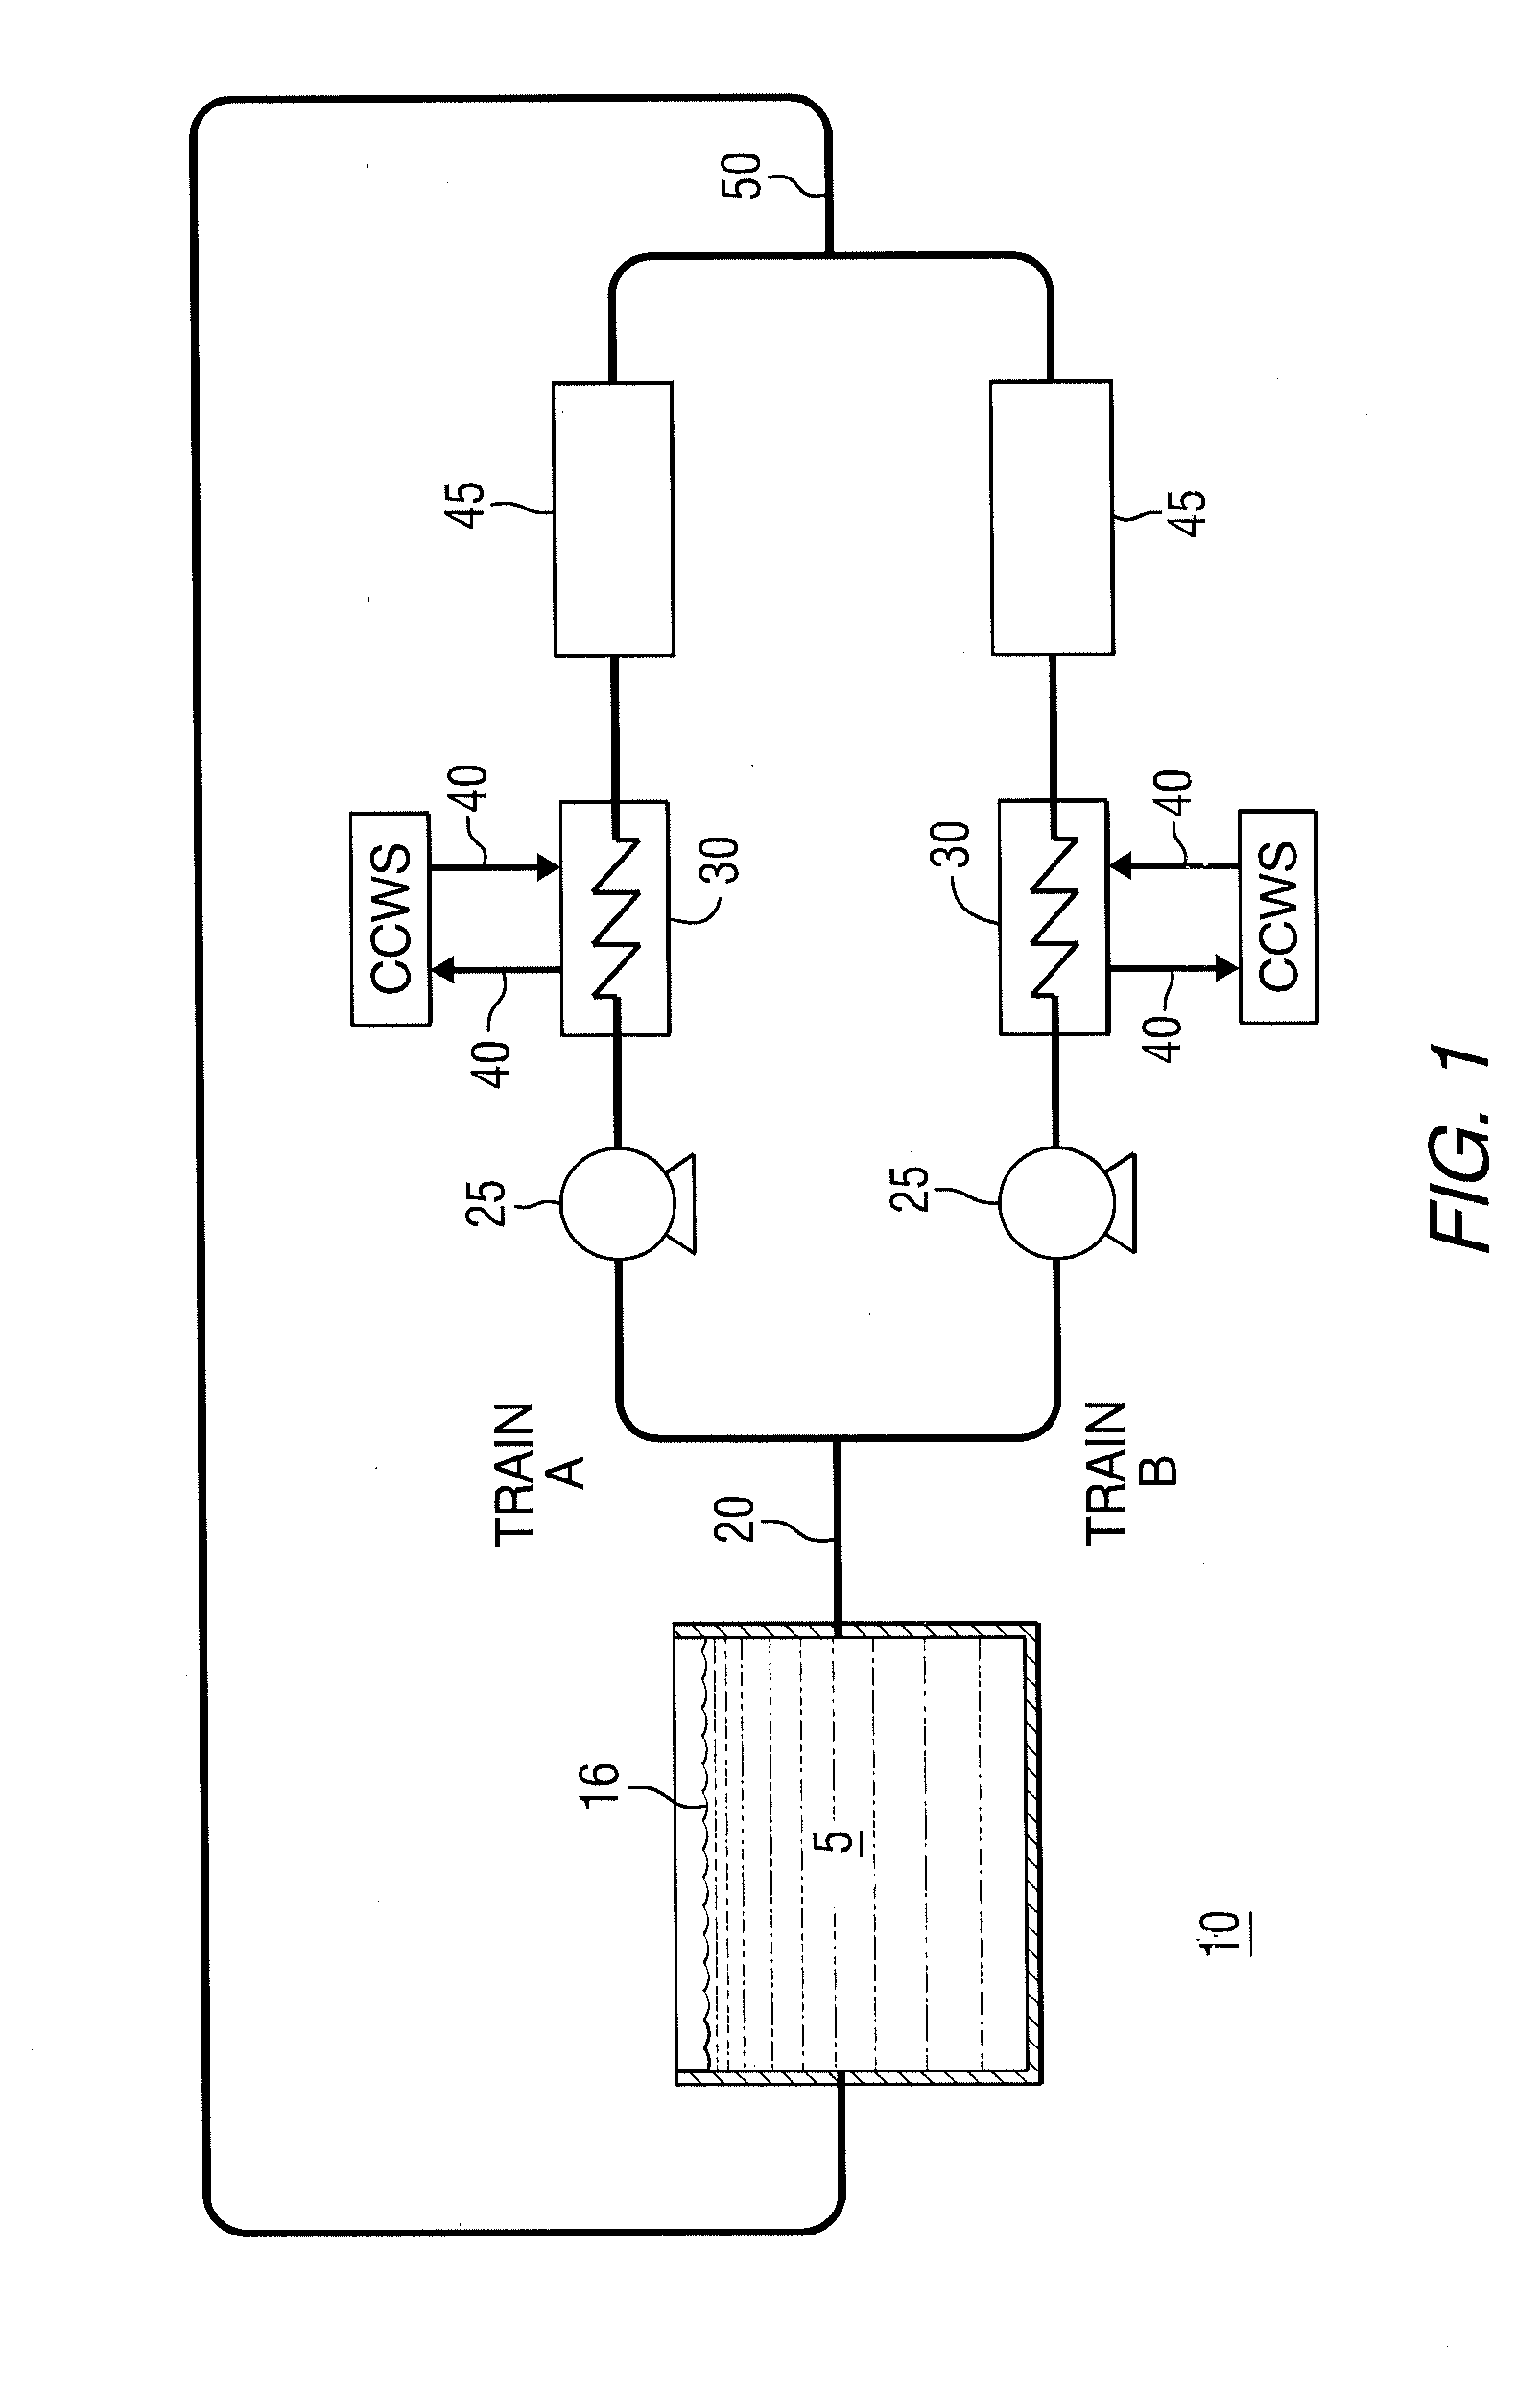 Alternate passive spent fuel pool cooling systems and methods